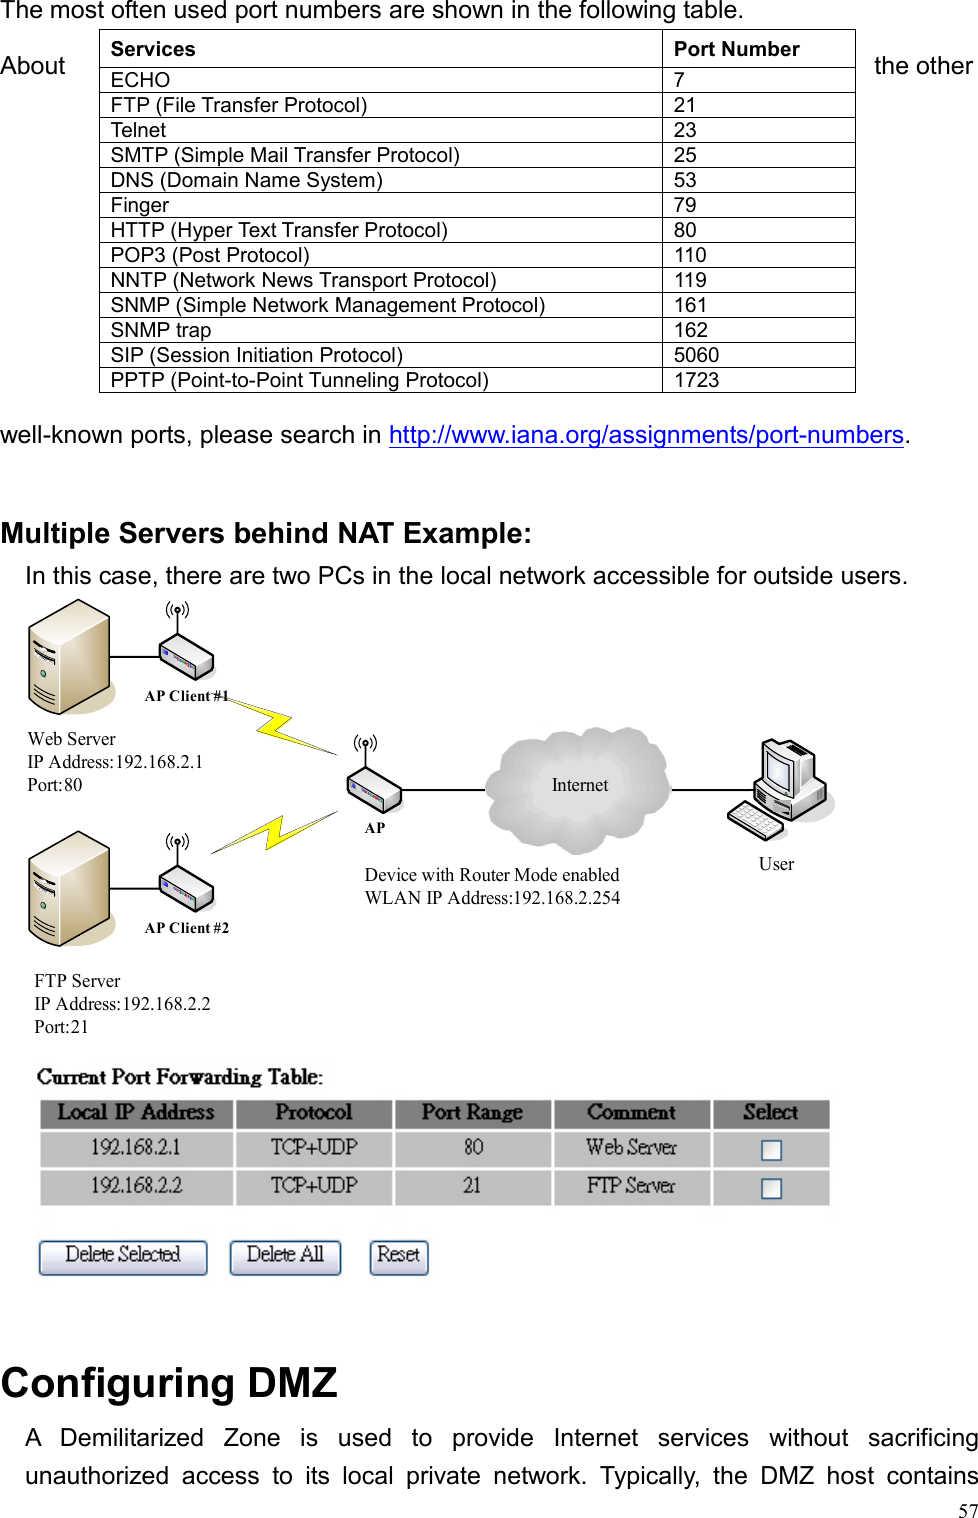  57The most often used port numbers are shown in the following table. About  the other well-known ports, please search in http://www.iana.org/assignments/port-numbers.   Multiple Servers behind NAT Example: In this case, there are two PCs in the local network accessible for outside users. InternetDevice with Router Mode enabledWLAN IP Address:192.168.2.254Web ServerIP Address:192.168.2.1Port:80FTP ServerIP Address:192.168.2.2Port:21UserAPAP Client #2AP Client #1   Configuring DMZ A Demilitarized Zone is used to provide Internet services without sacrificing unauthorized access to its local private network. Typically, the DMZ host contains Services Port Number ECHO 7 FTP (File Transfer Protocol)  21 Telnet 23 SMTP (Simple Mail Transfer Protocol)  25 DNS (Domain Name System)  53 Finger 79 HTTP (Hyper Text Transfer Protocol)  80 POP3 (Post Protocol)  110 NNTP (Network News Transport Protocol)  119 SNMP (Simple Network Management Protocol)  161 SNMP trap  162 SIP (Session Initiation Protocol)  5060 PPTP (Point-to-Point Tunneling Protocol)  1723 